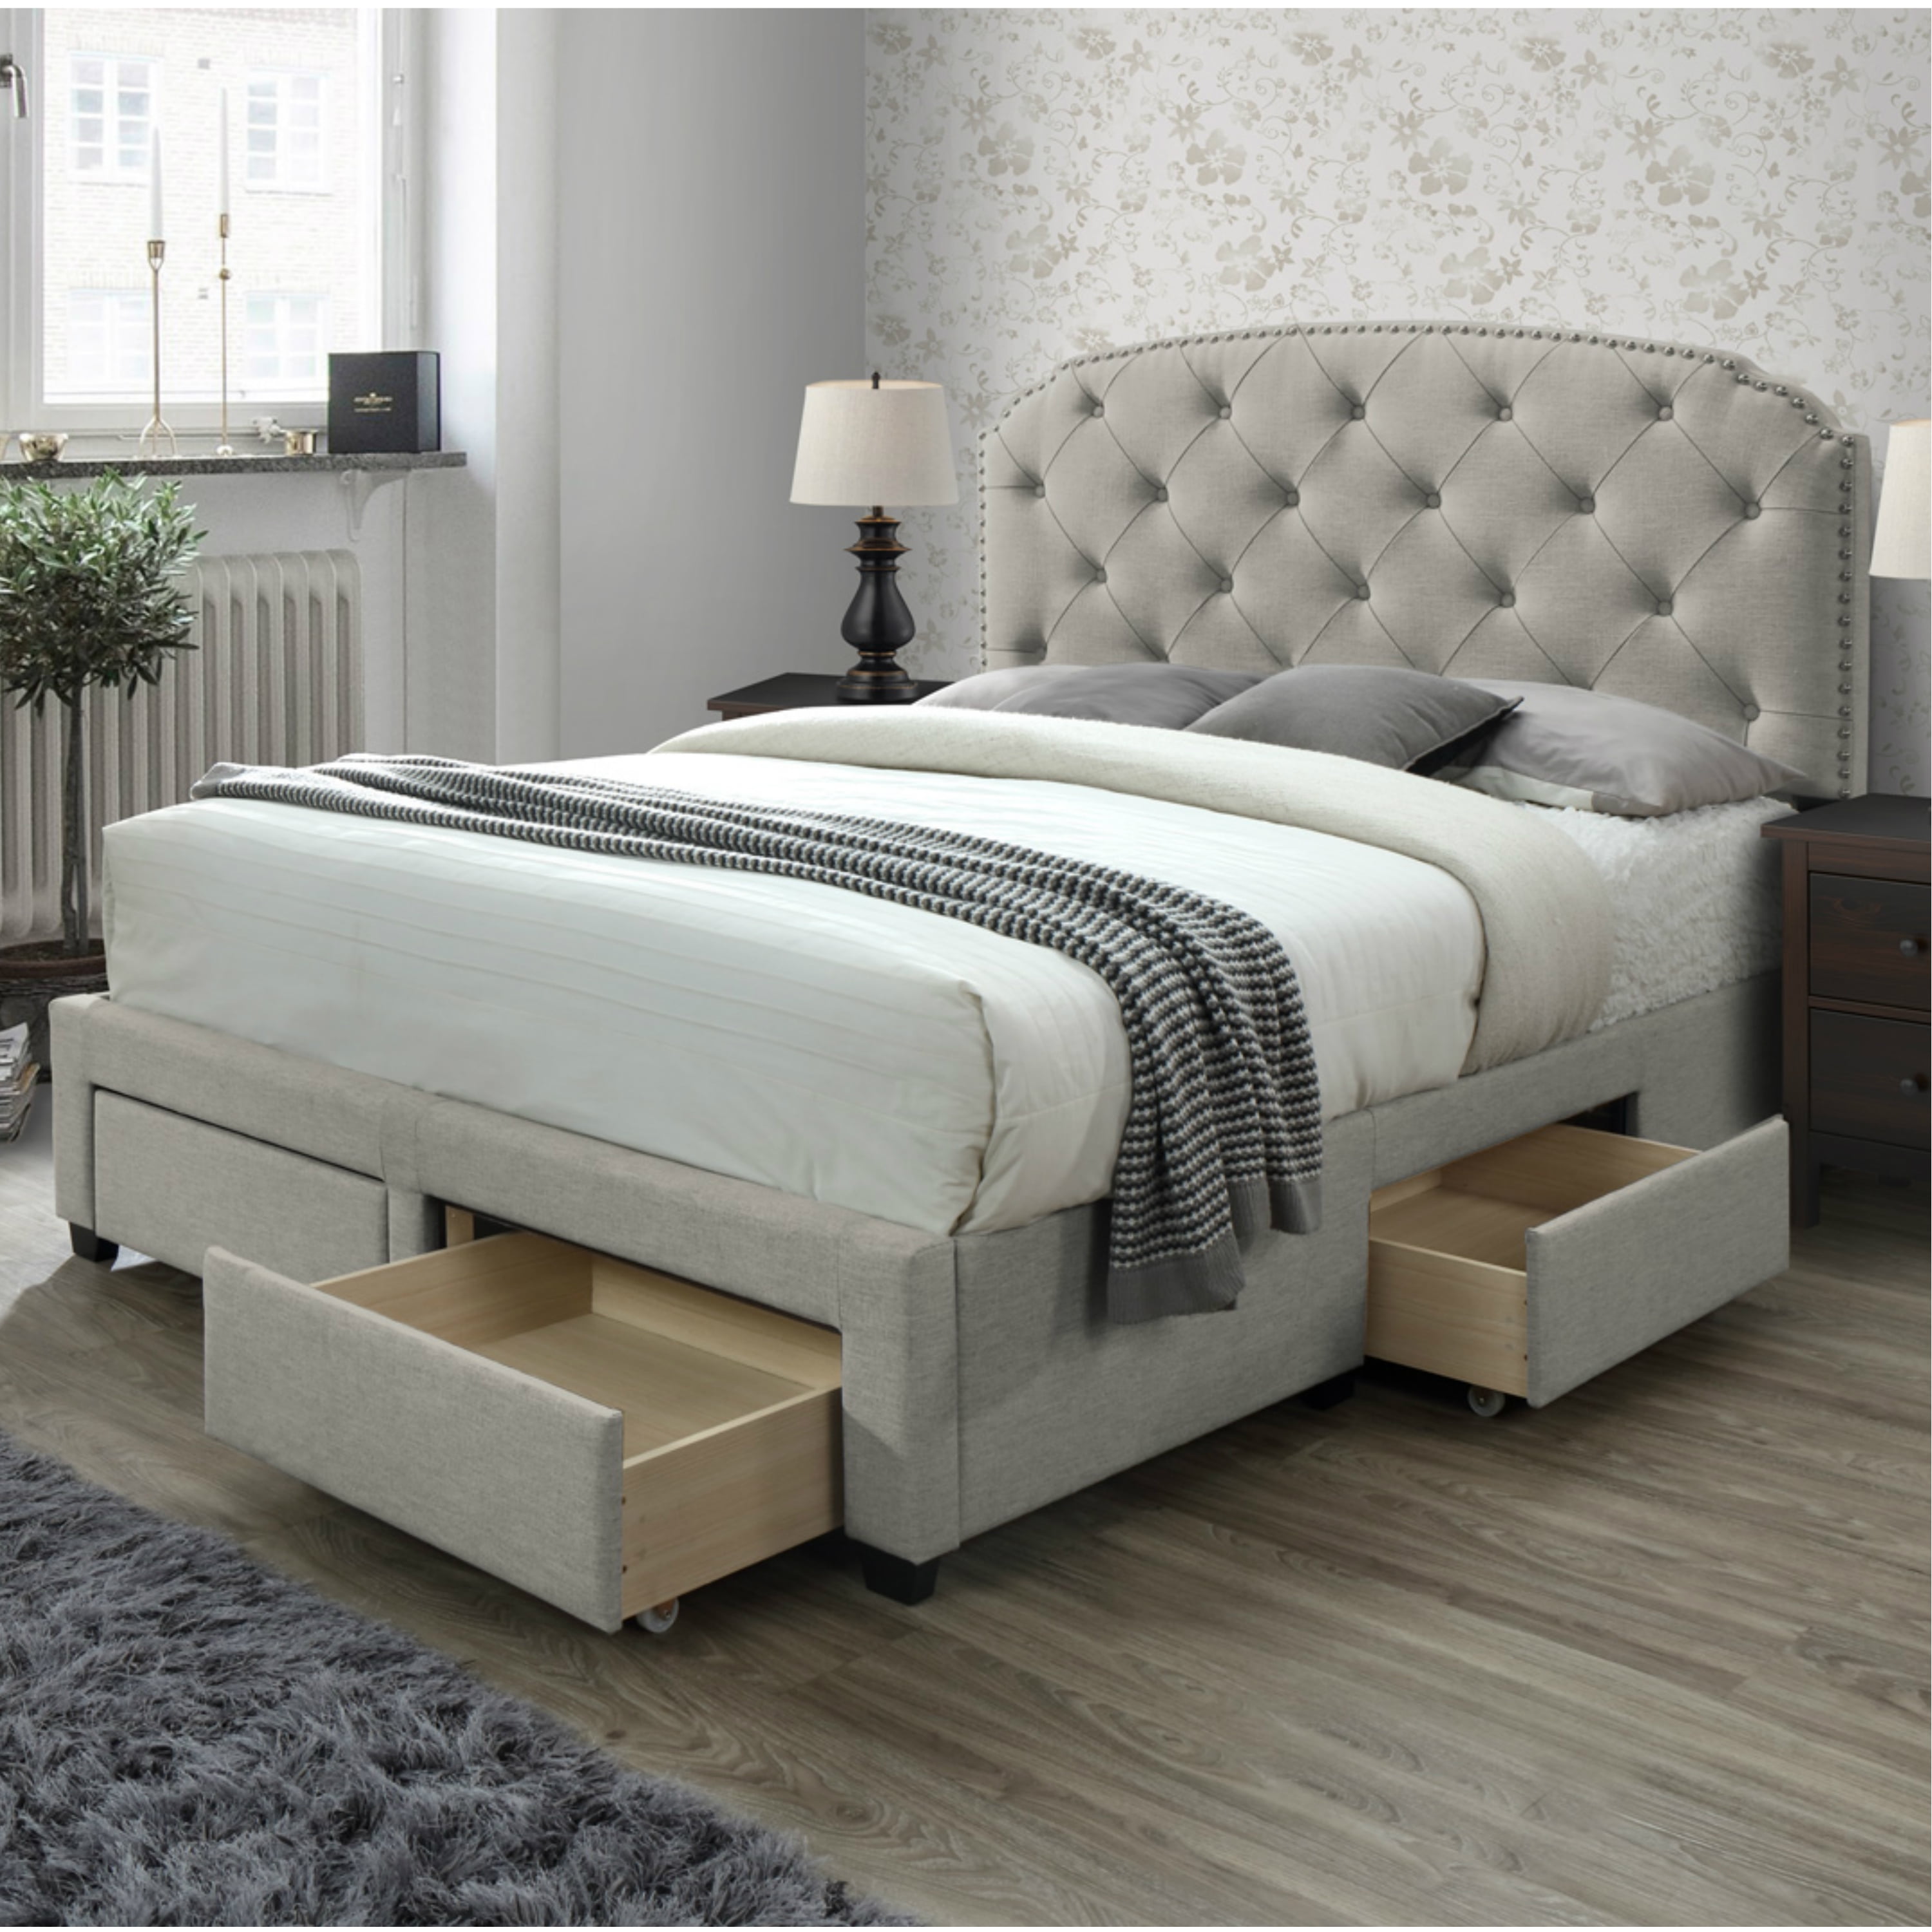 Dg Casa Argo Tufted Upholstered Panel, Queen Size Bed Frame With Headboard Shelf